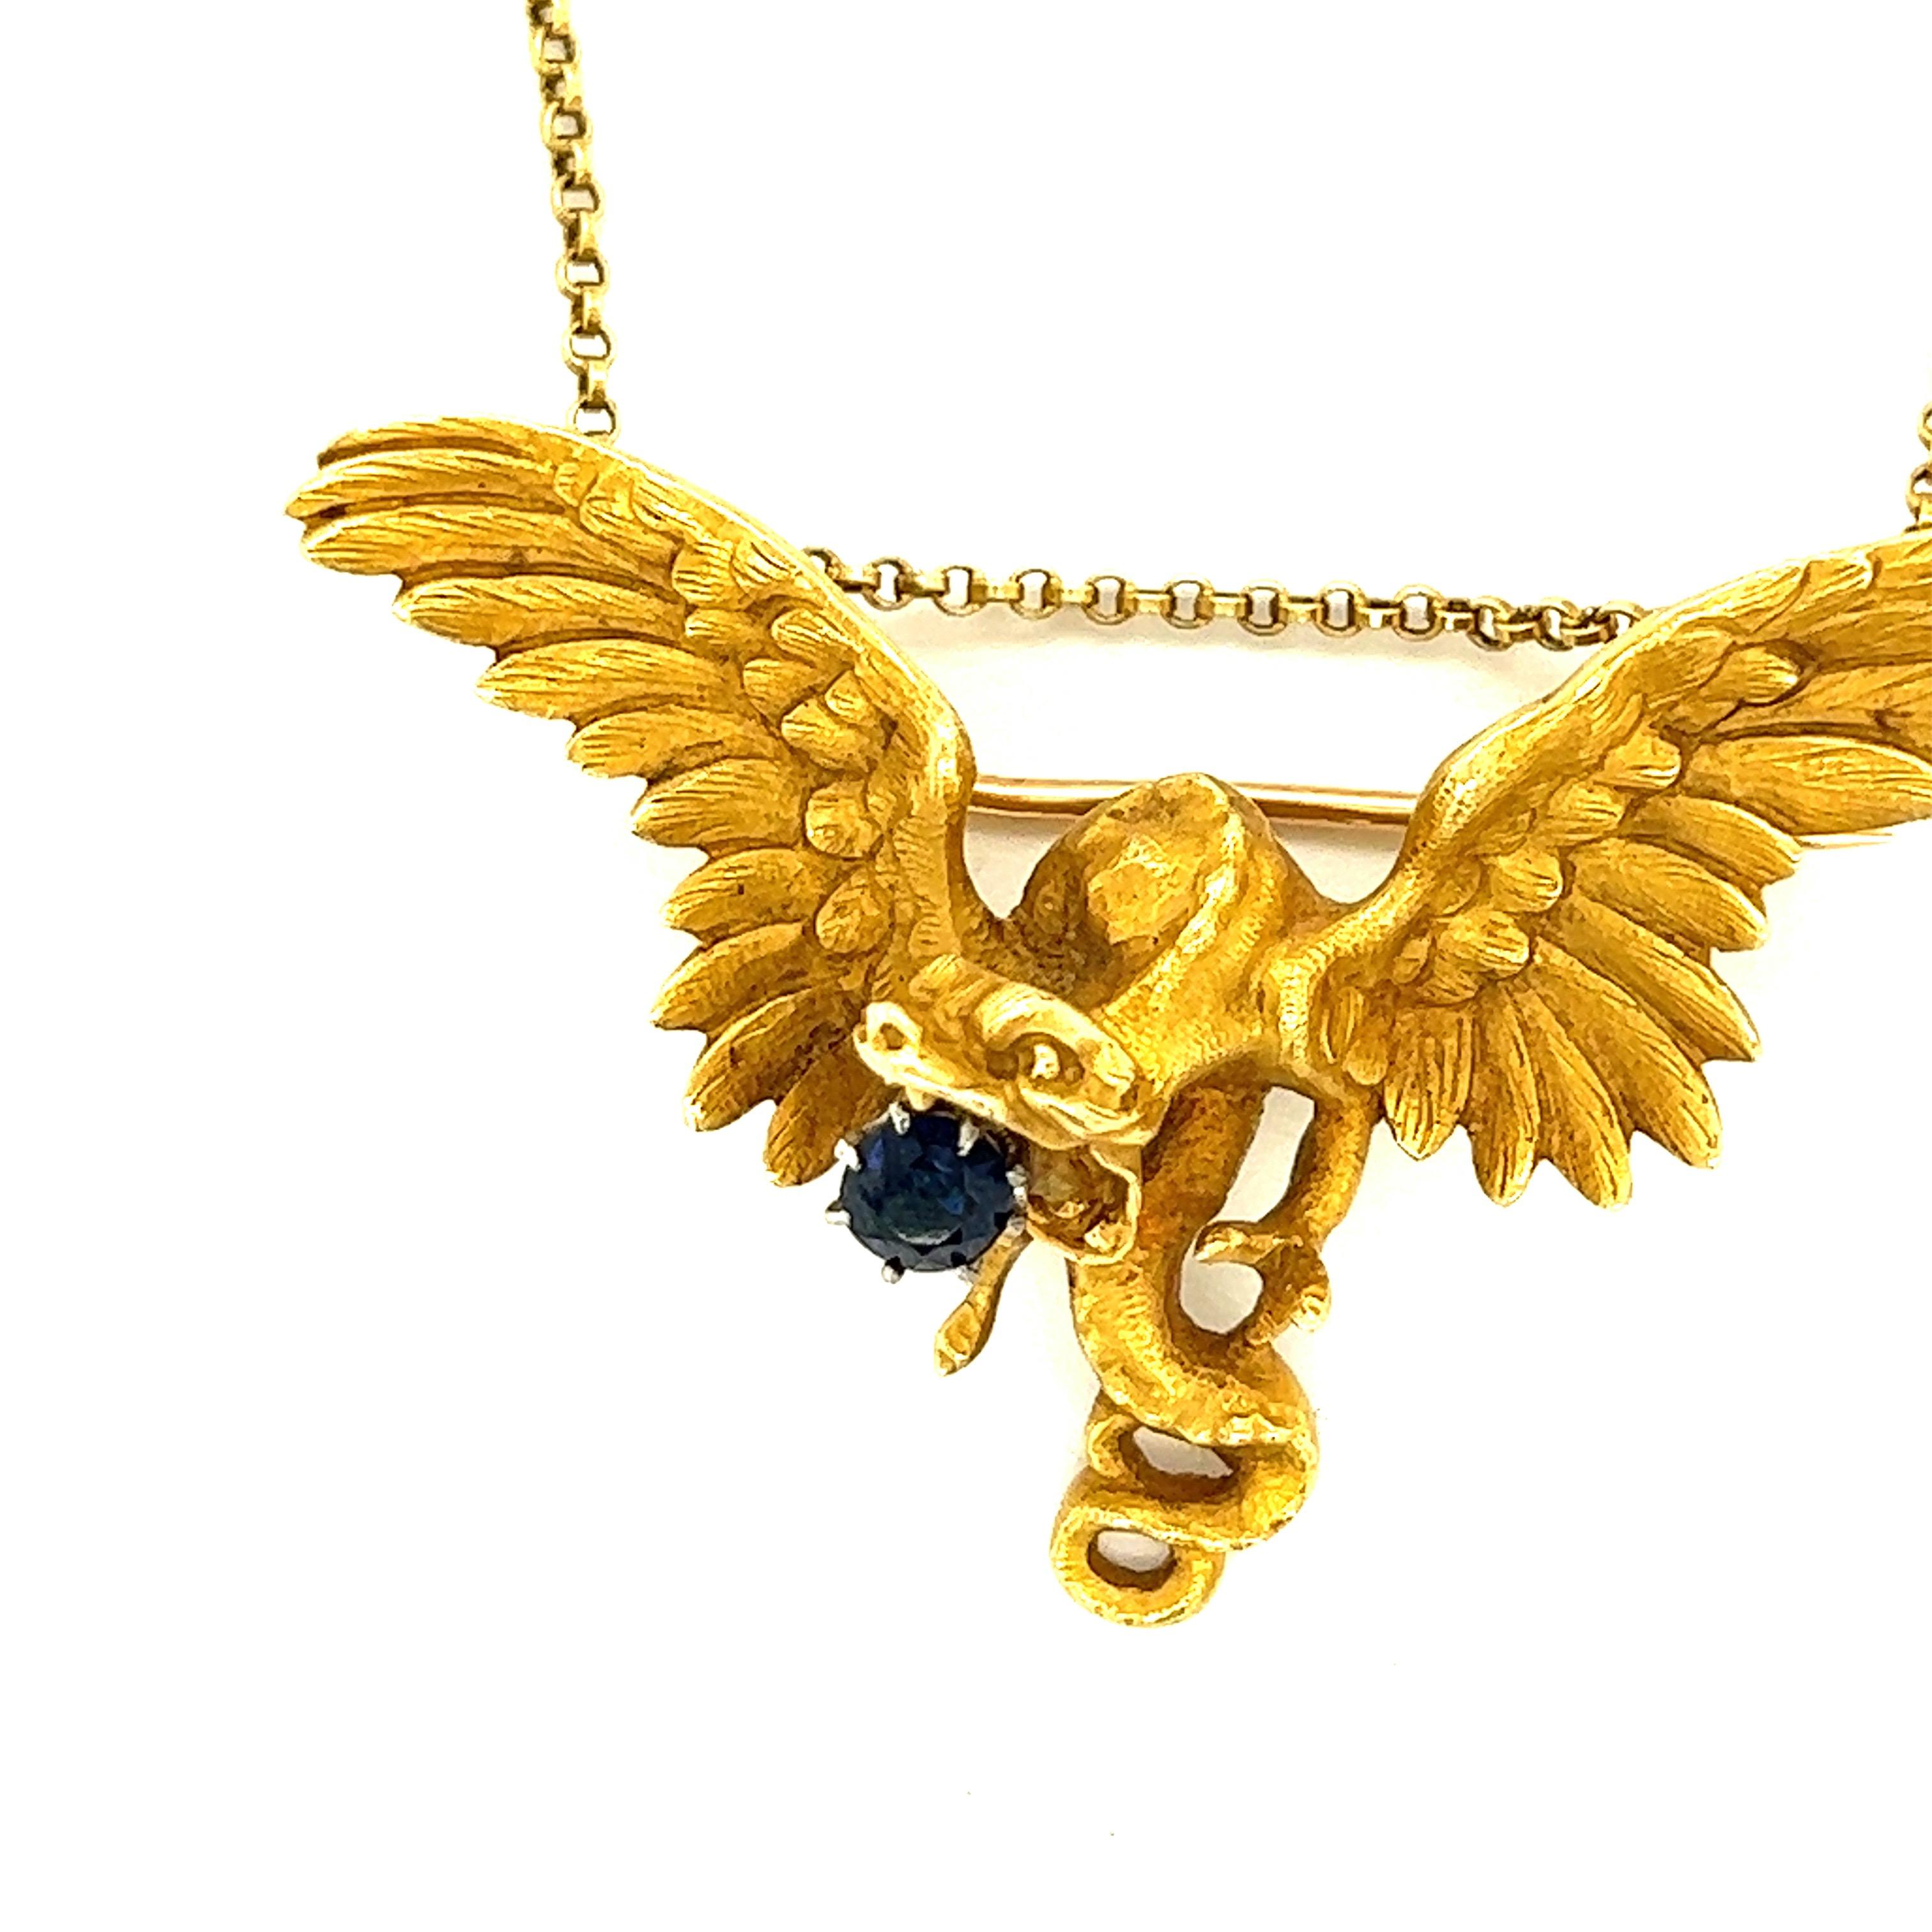 Sapphire 18k Yellow Gold Bird Pendant Necklace

One round-cut sapphire, set on 18 karat yellow gold, featuring a bird motif with its wings spread out; the pendant can be converted into a brooch

Size: Pendant width 5.3 cm, length 4 cm; Chain length